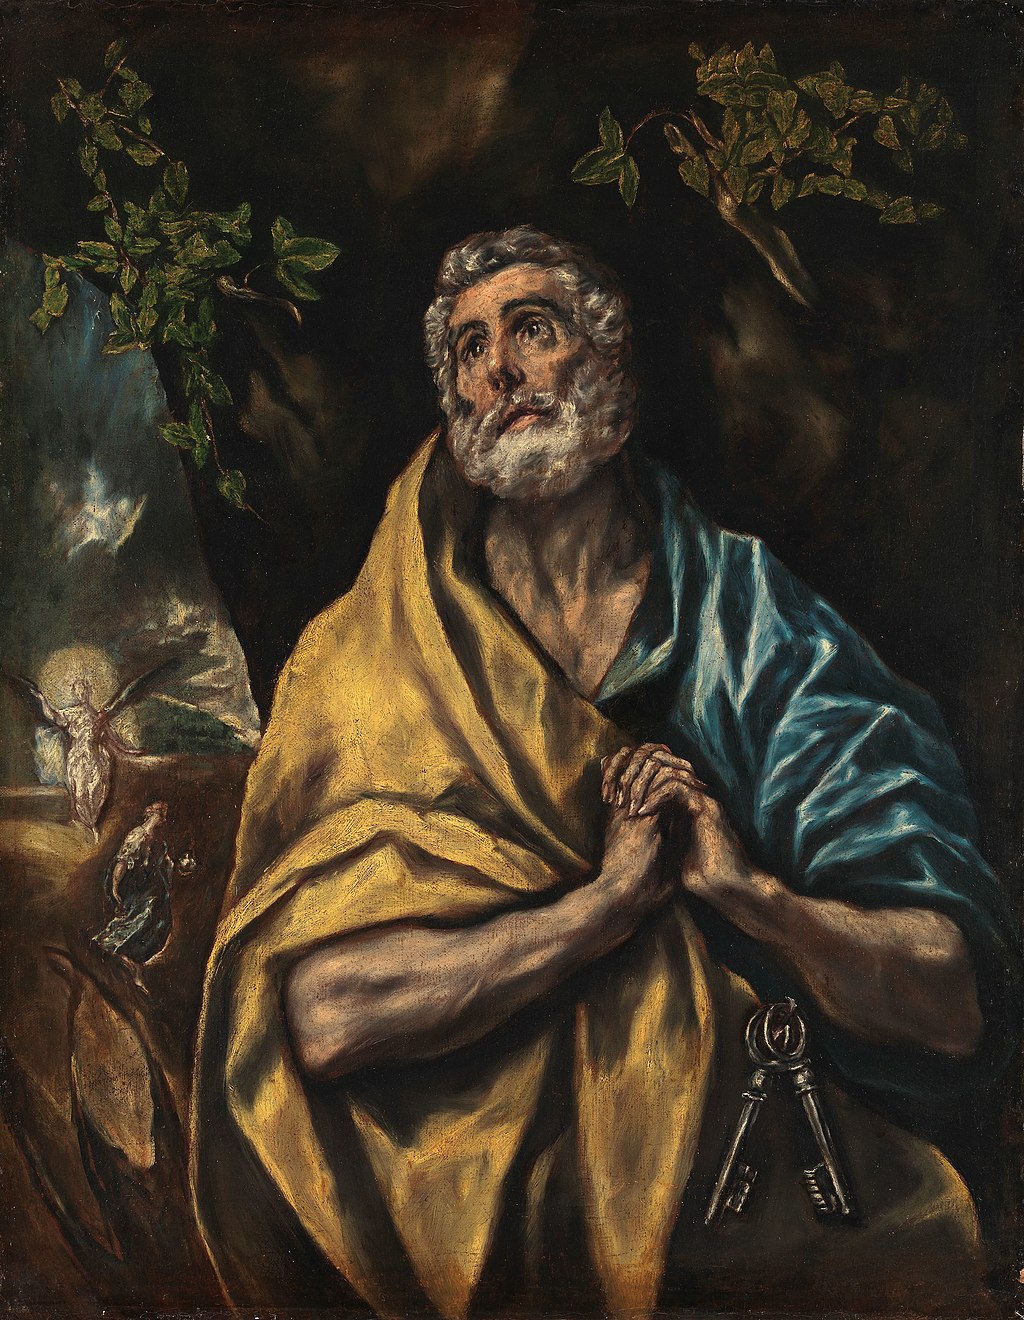 St Peter Repentant by El Greco (National Gallery of Norway)